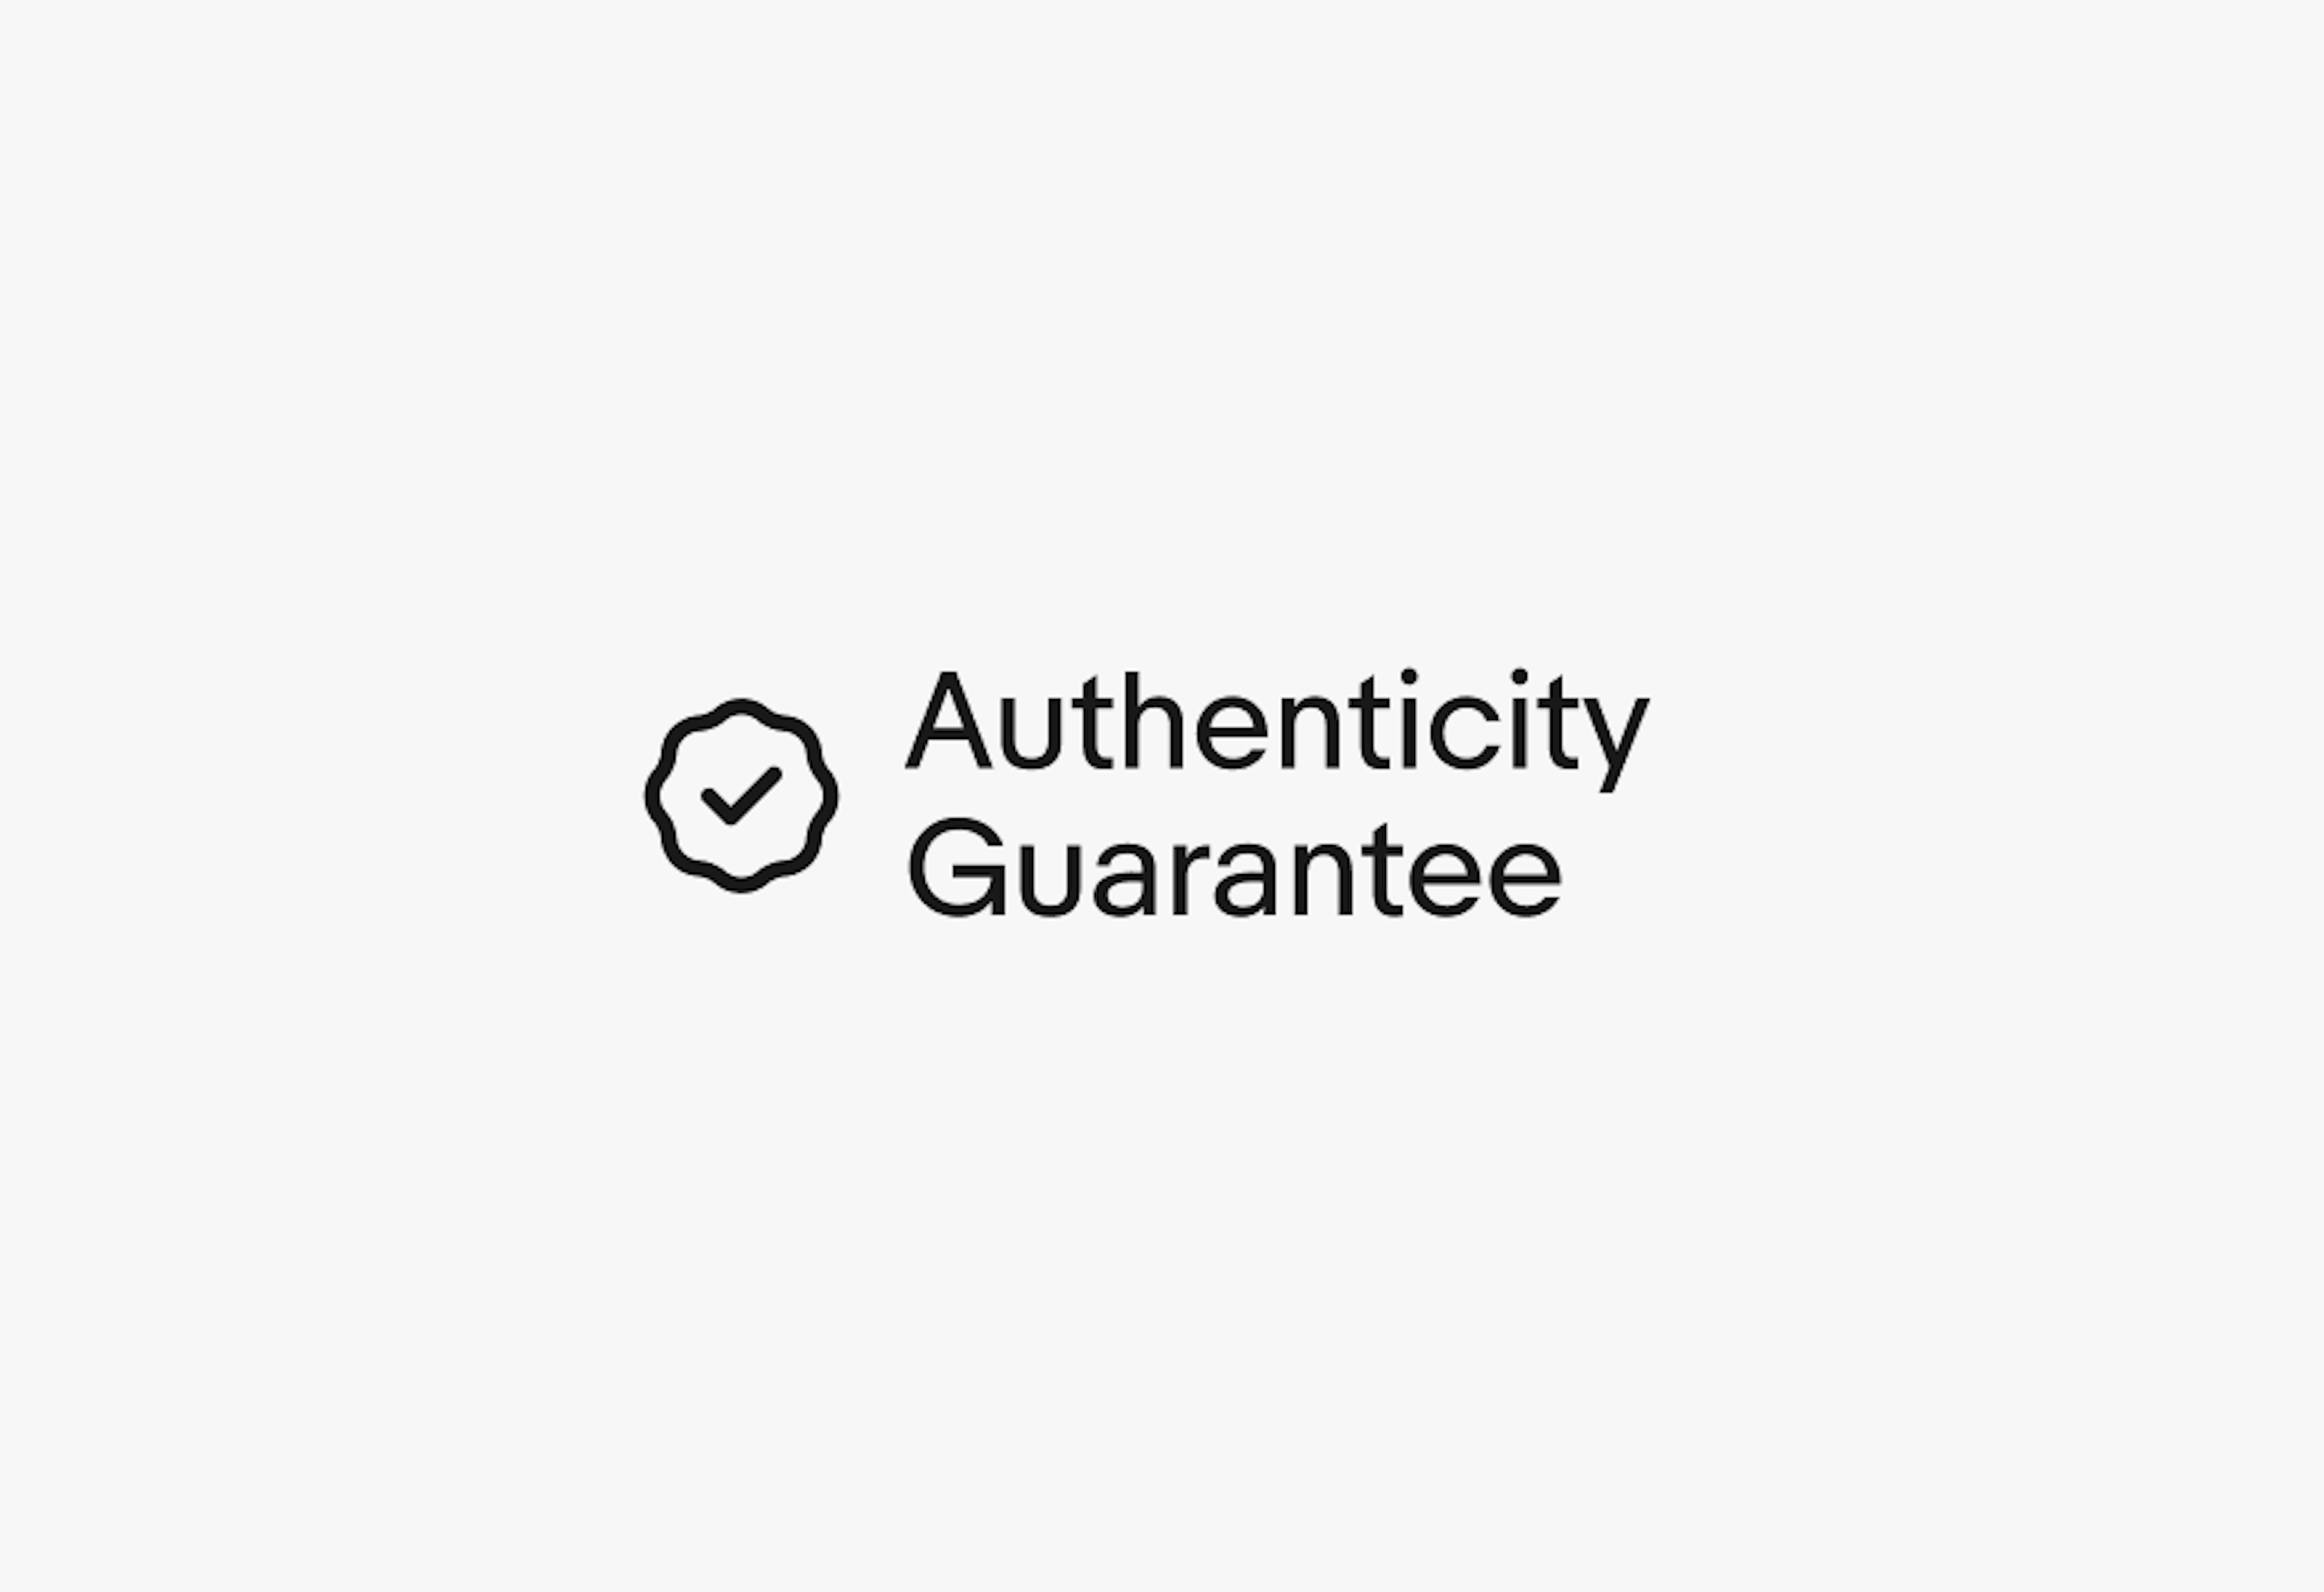 A double line program lockup for Authenticity Guarantee. The icon is small and to the left of two lines of text.